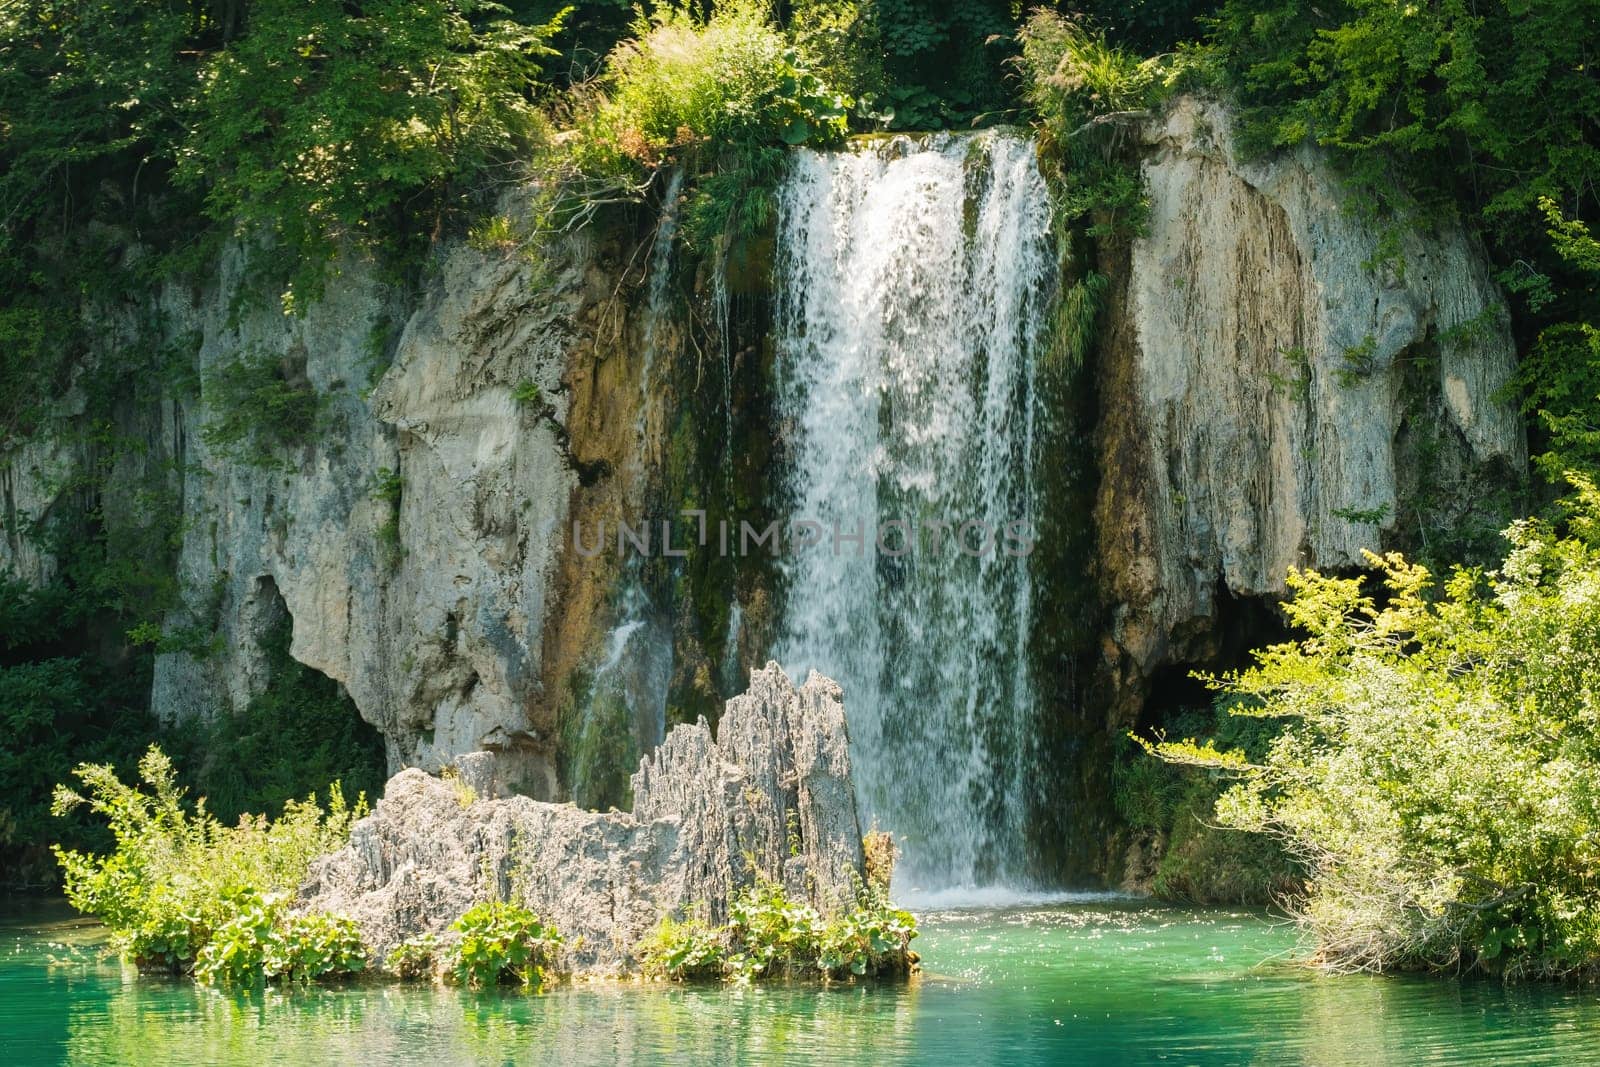 Waterfall flows down from rocky cliff into clear turquoise water at sunlight. Breathtaking view of aquamarine cascade in national park on Plitvice lakes